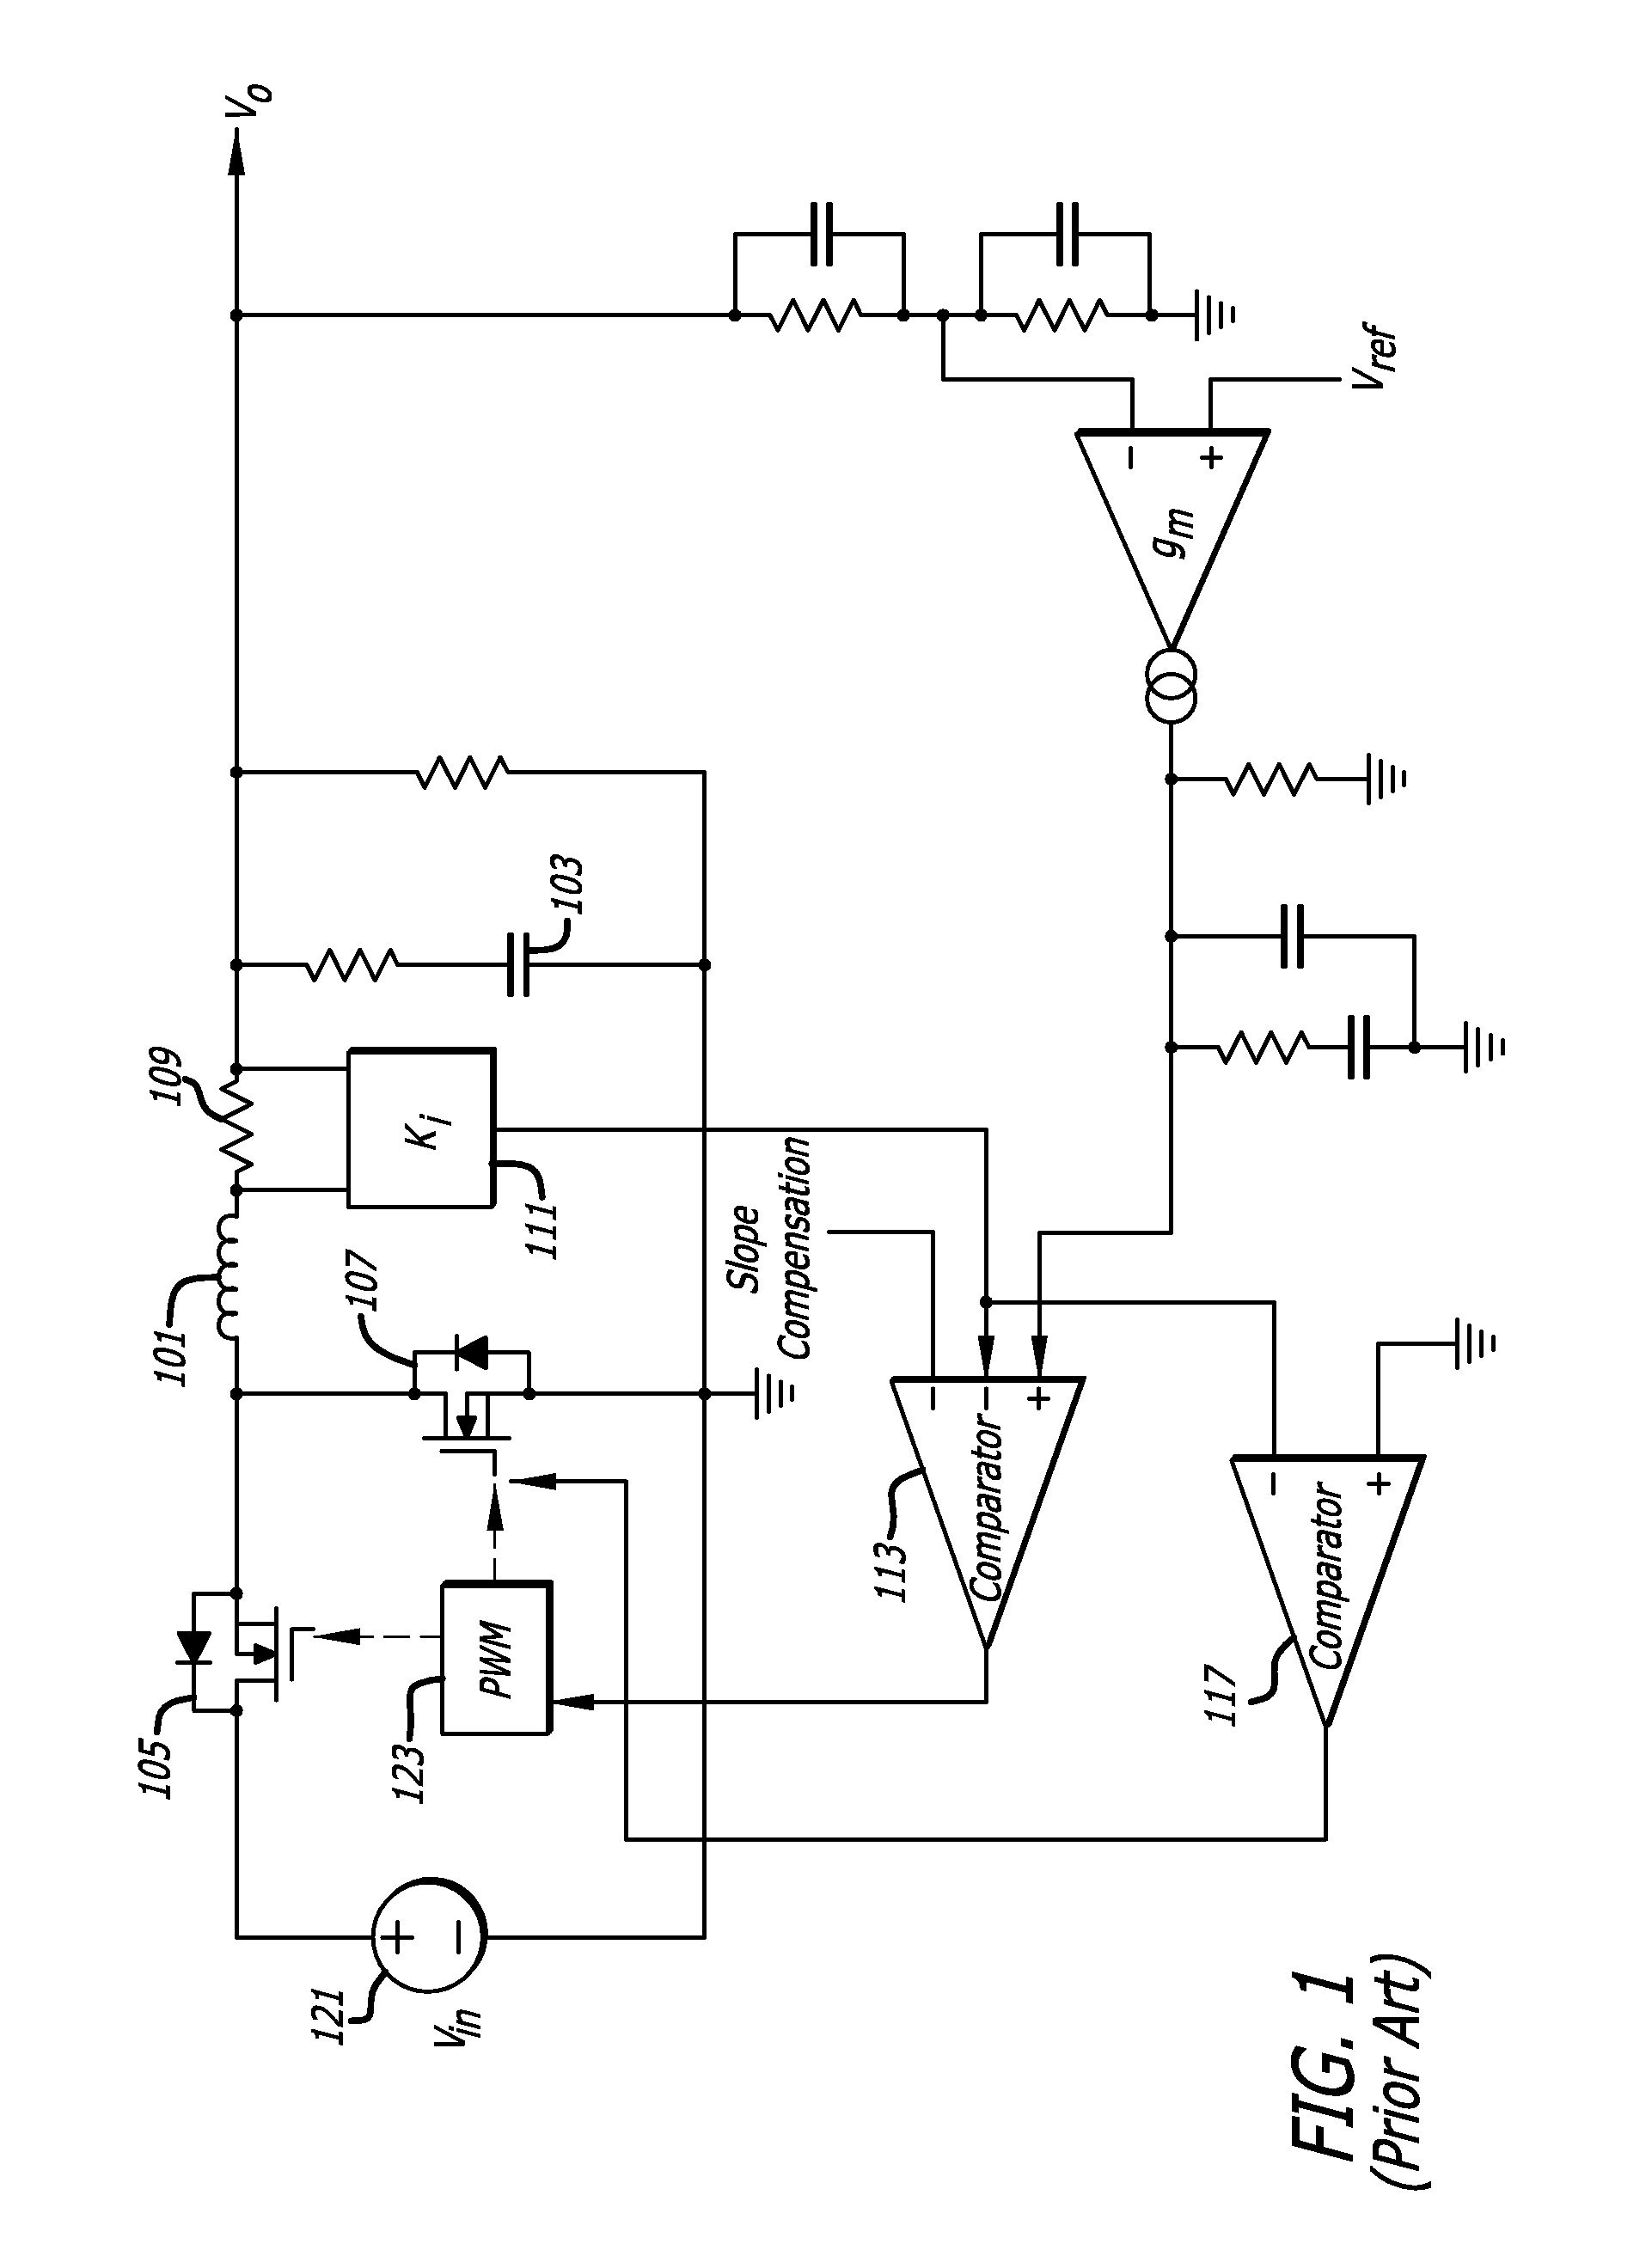 Clean transition between ccm and dcm in valley current mode control of dc-to-dc converter